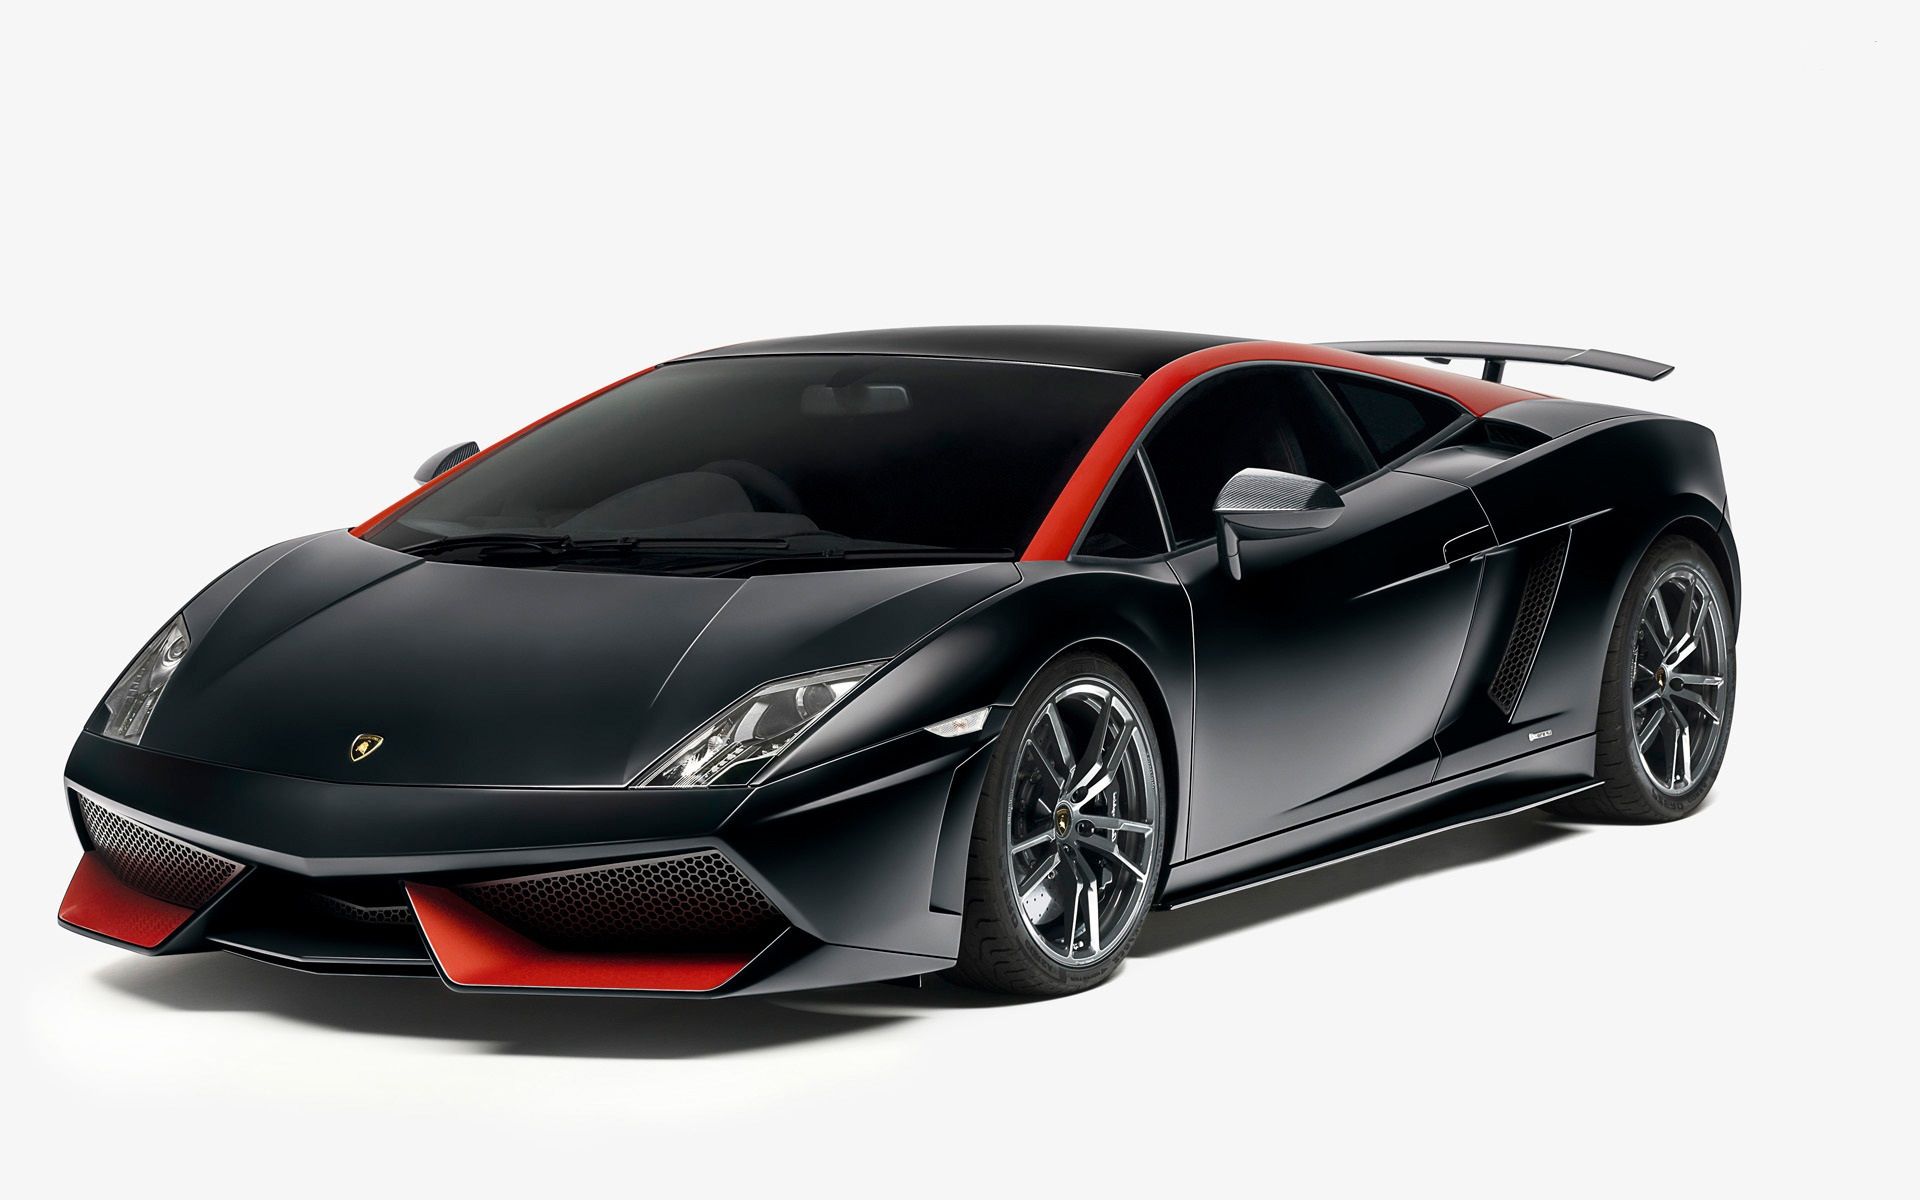 Top 10 Most Expensive Cars in the Middle East